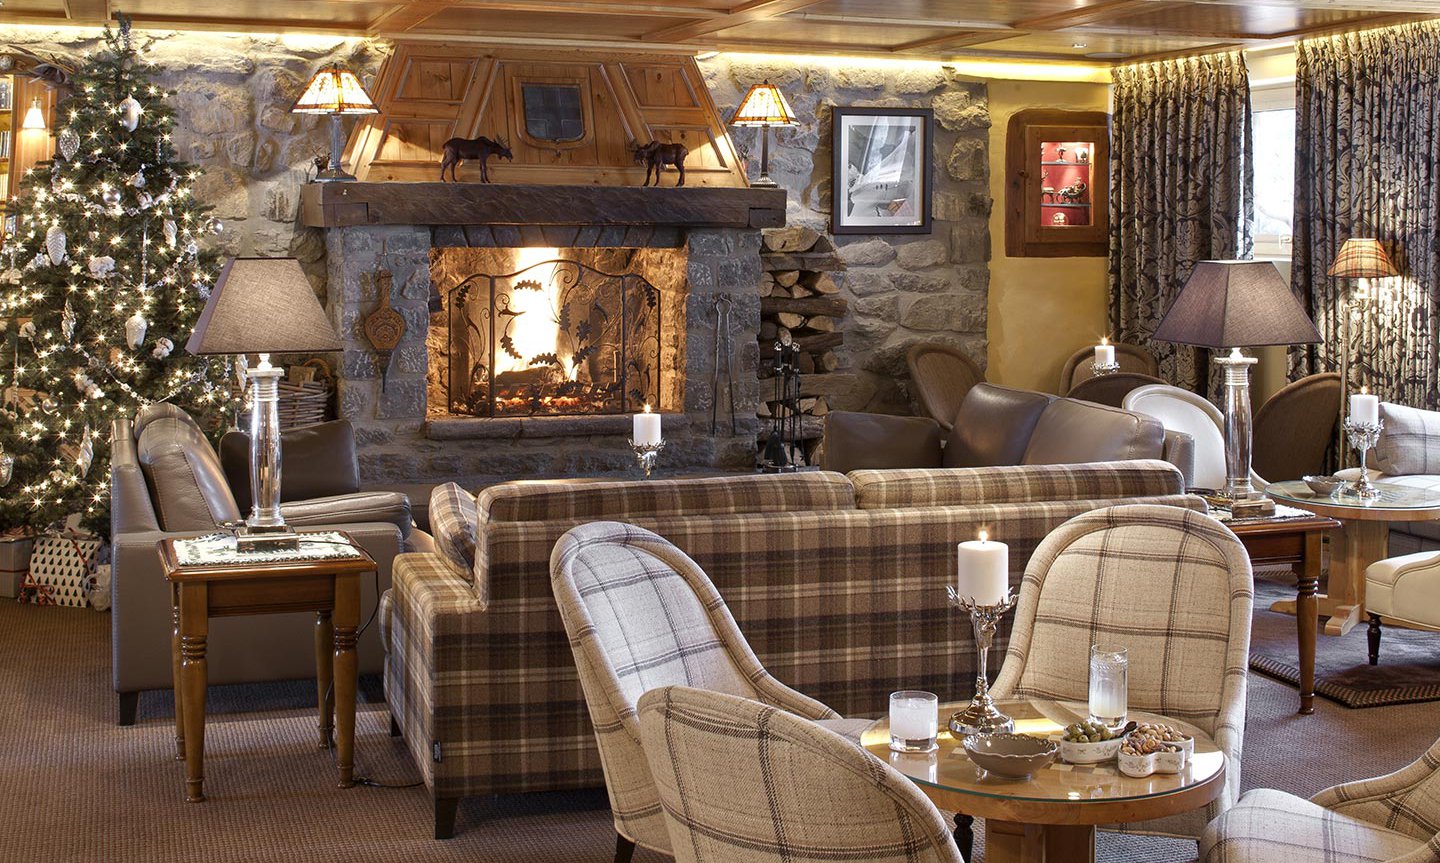 Hotel Le Grand Coeur Bar with Roaring Fire